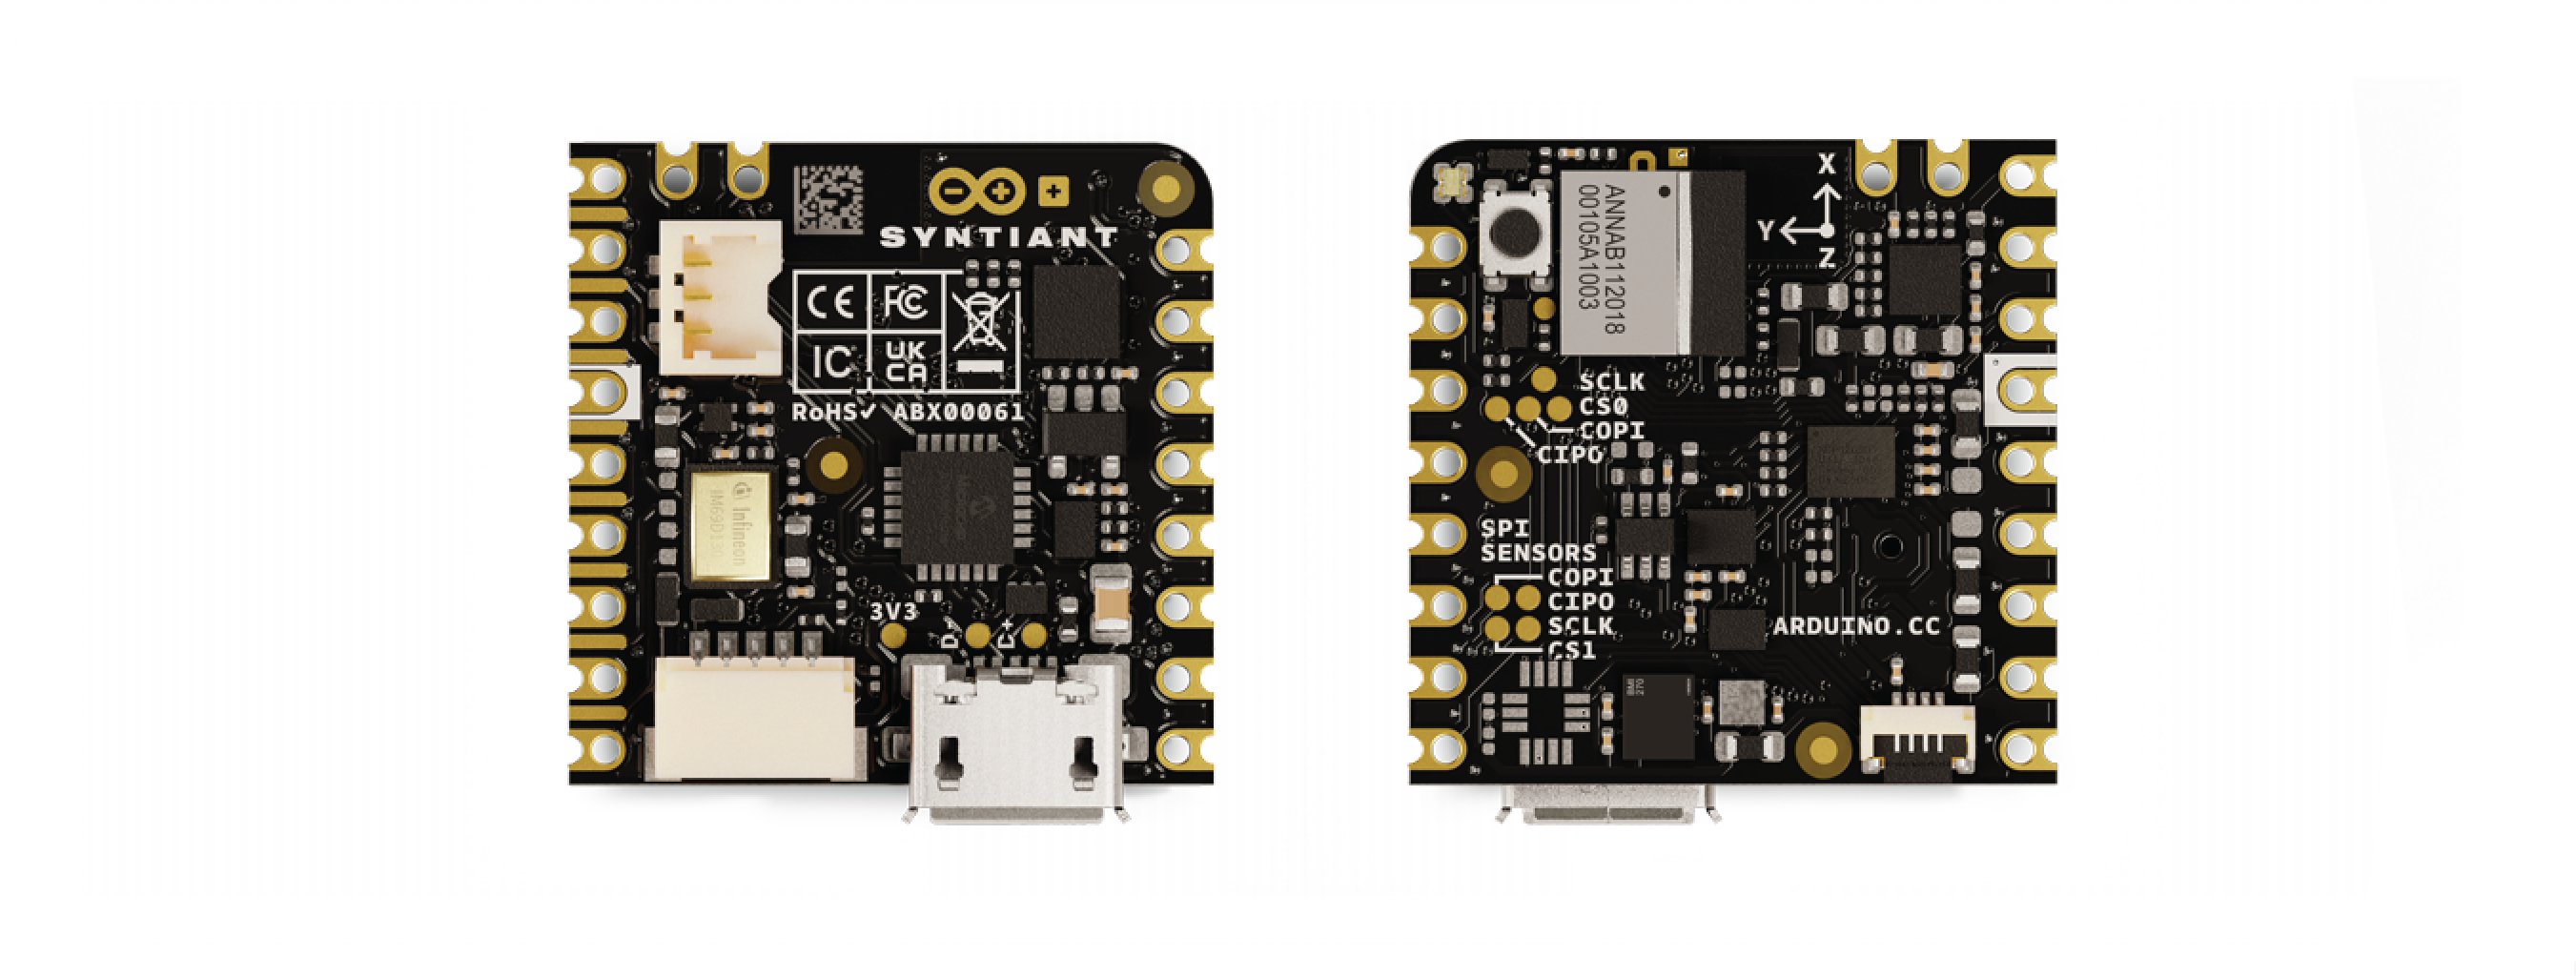 Featuring Arduino Nicla Voice with Speech Recognition, BL5.0 and Much More